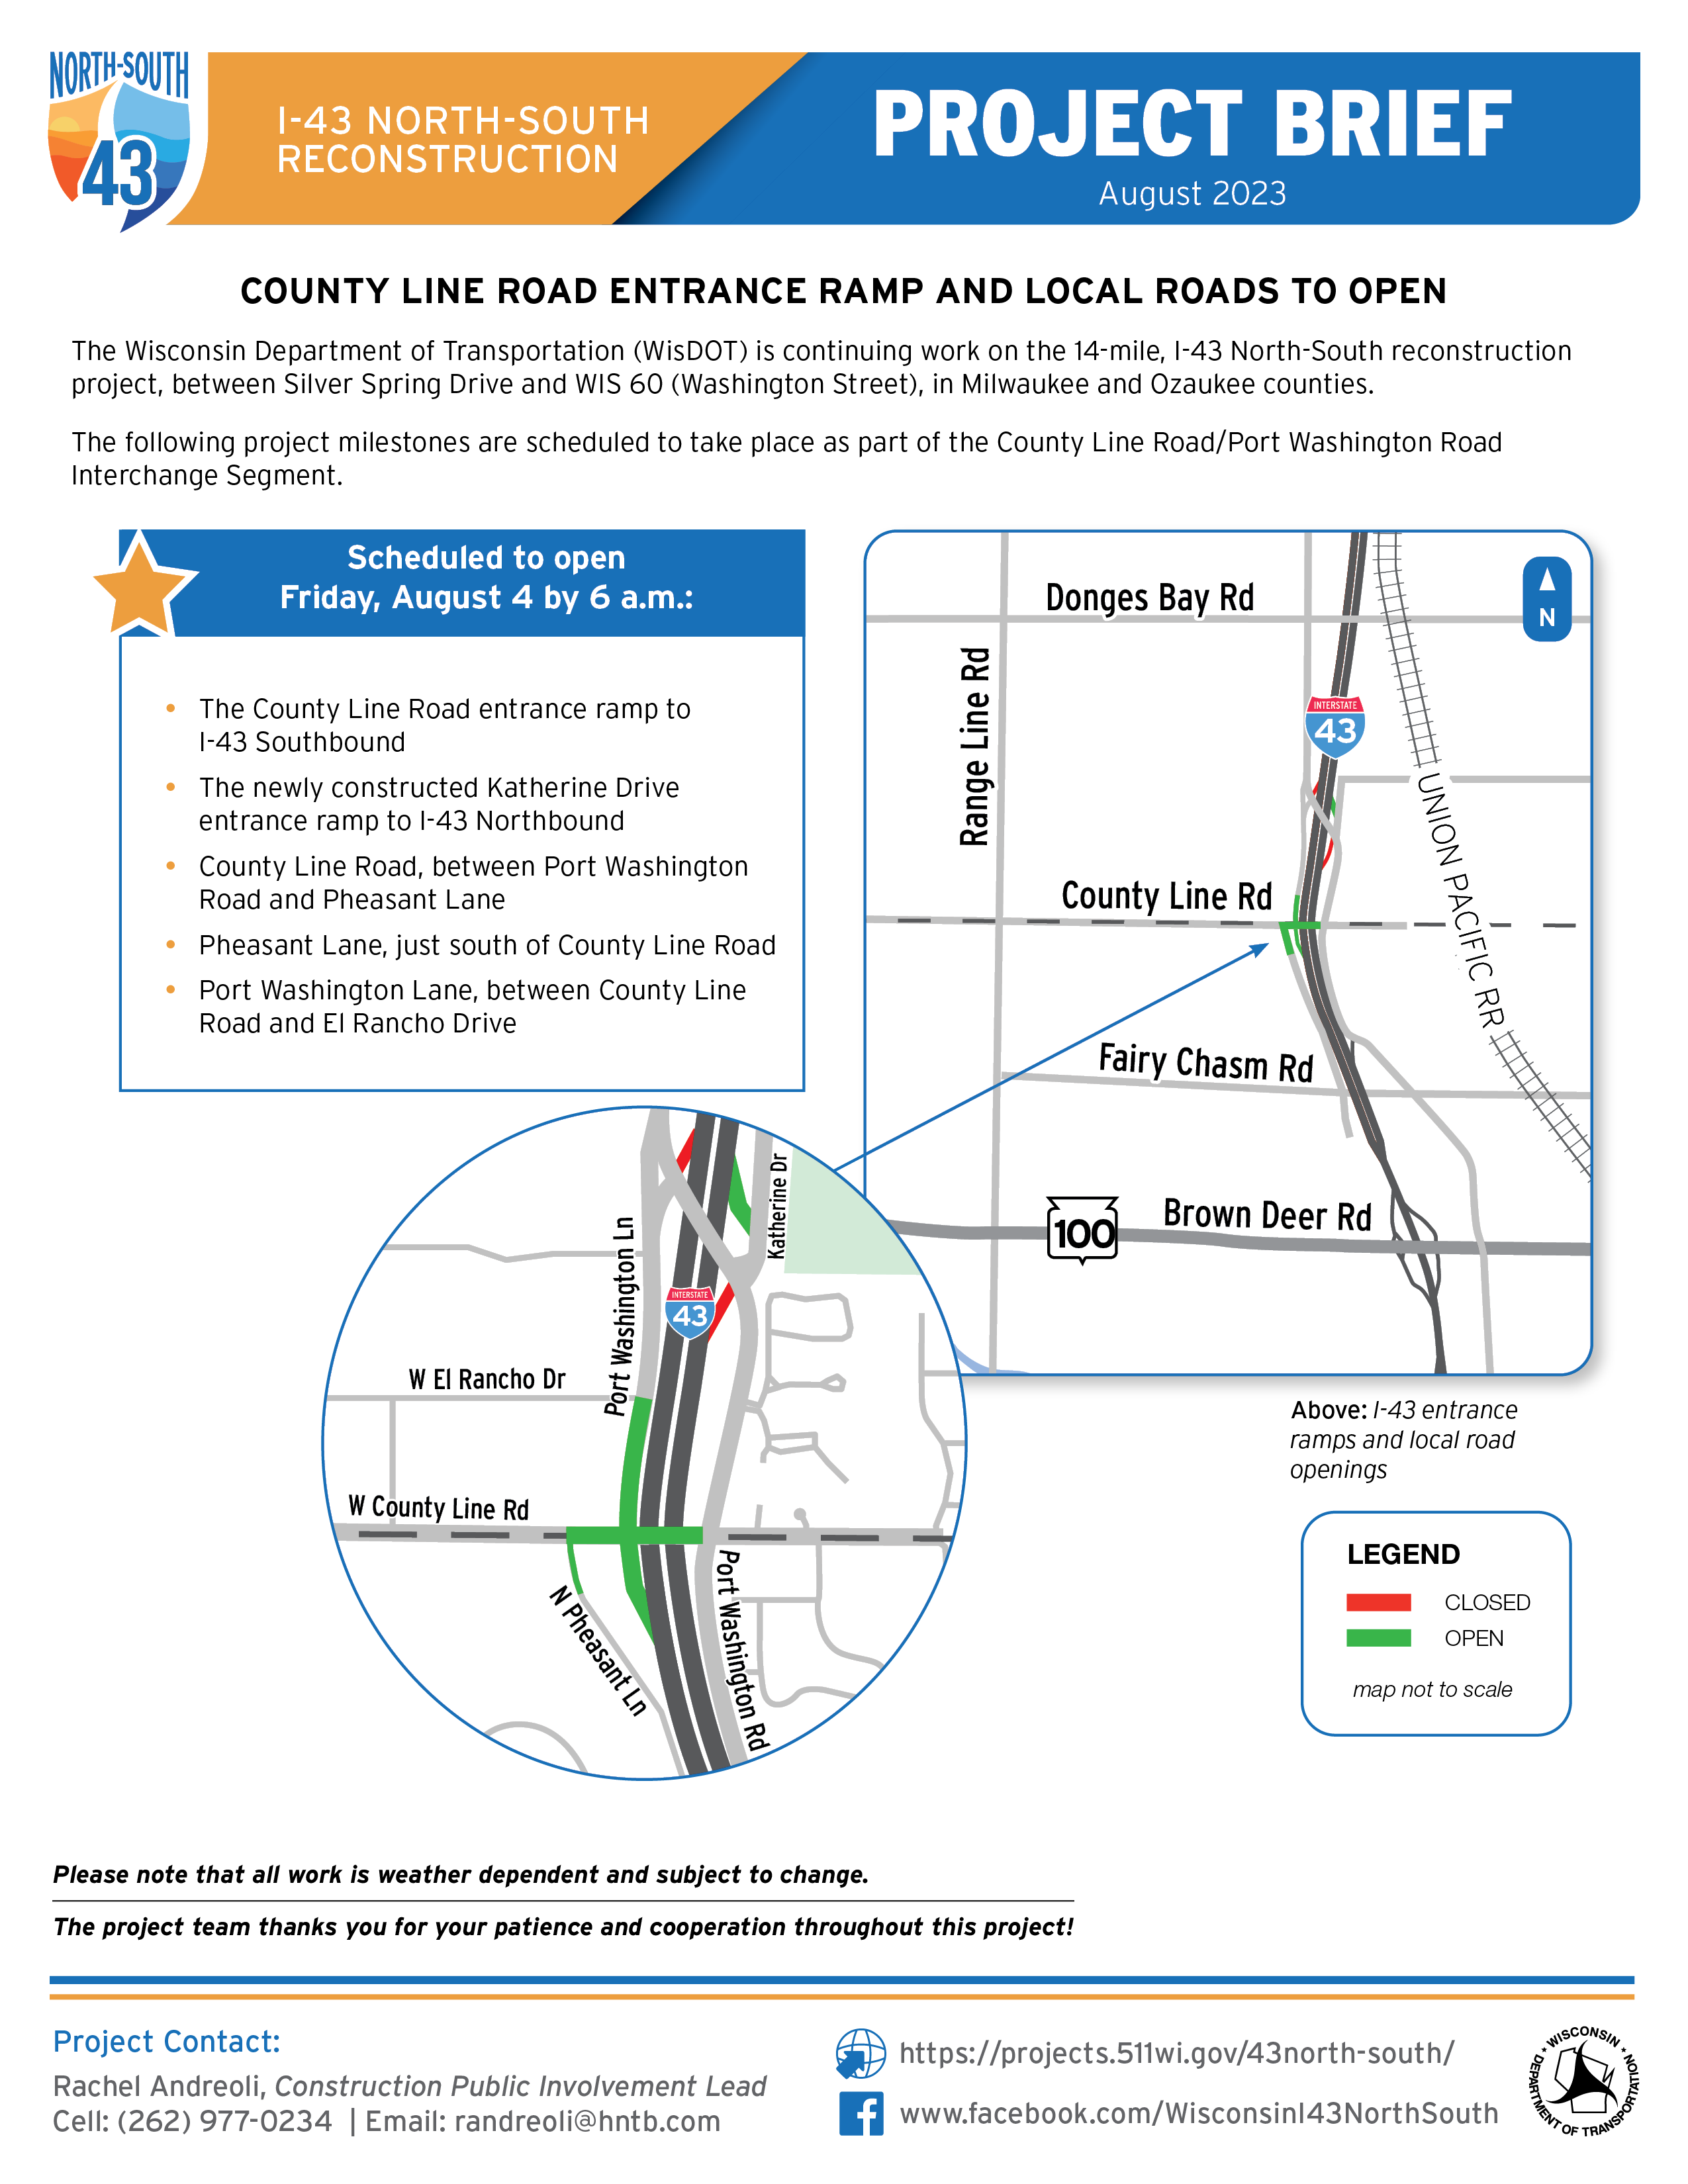 August 4, County Line Road Entrance Ramp and Local Roads to Open